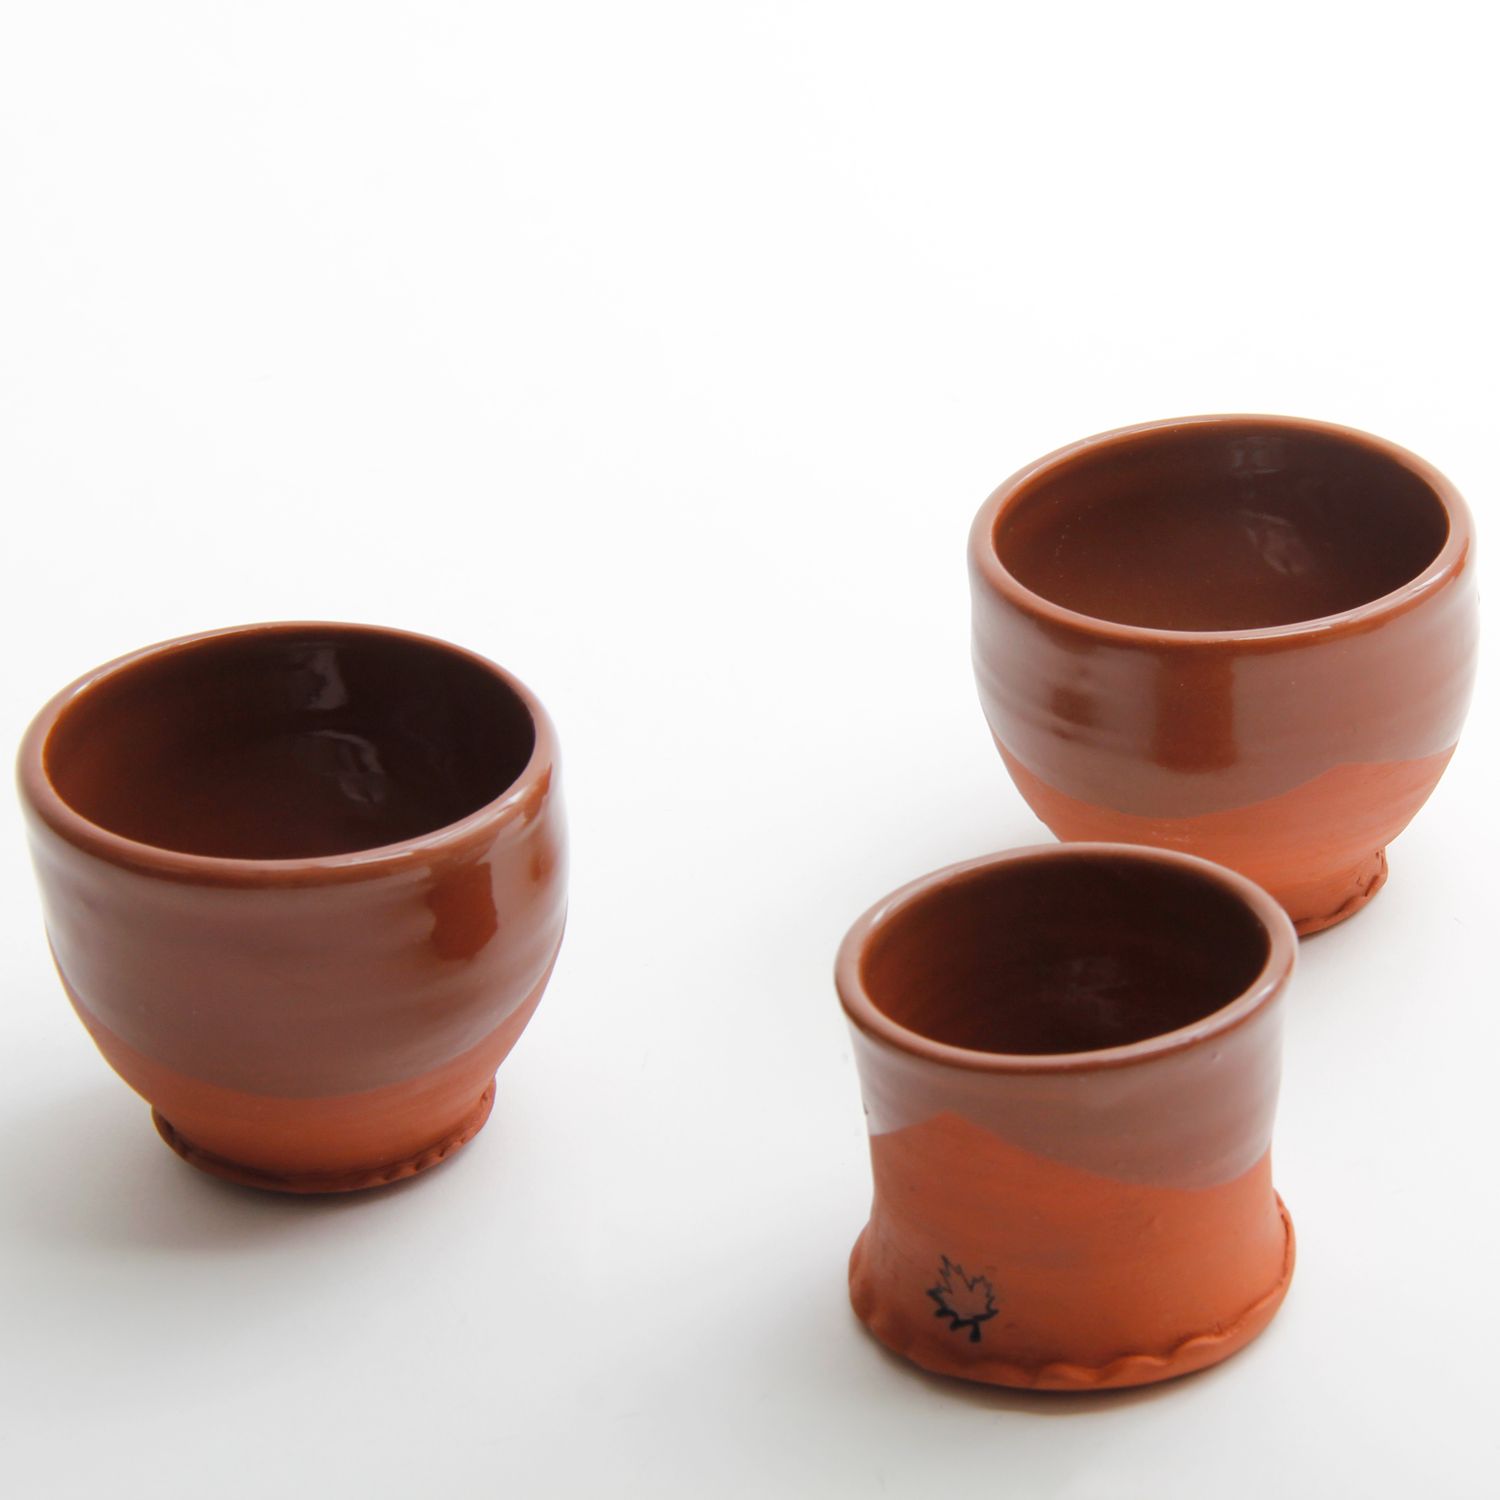 Mary McKenzie: Shot Glass Brown Product Image 2 of 3